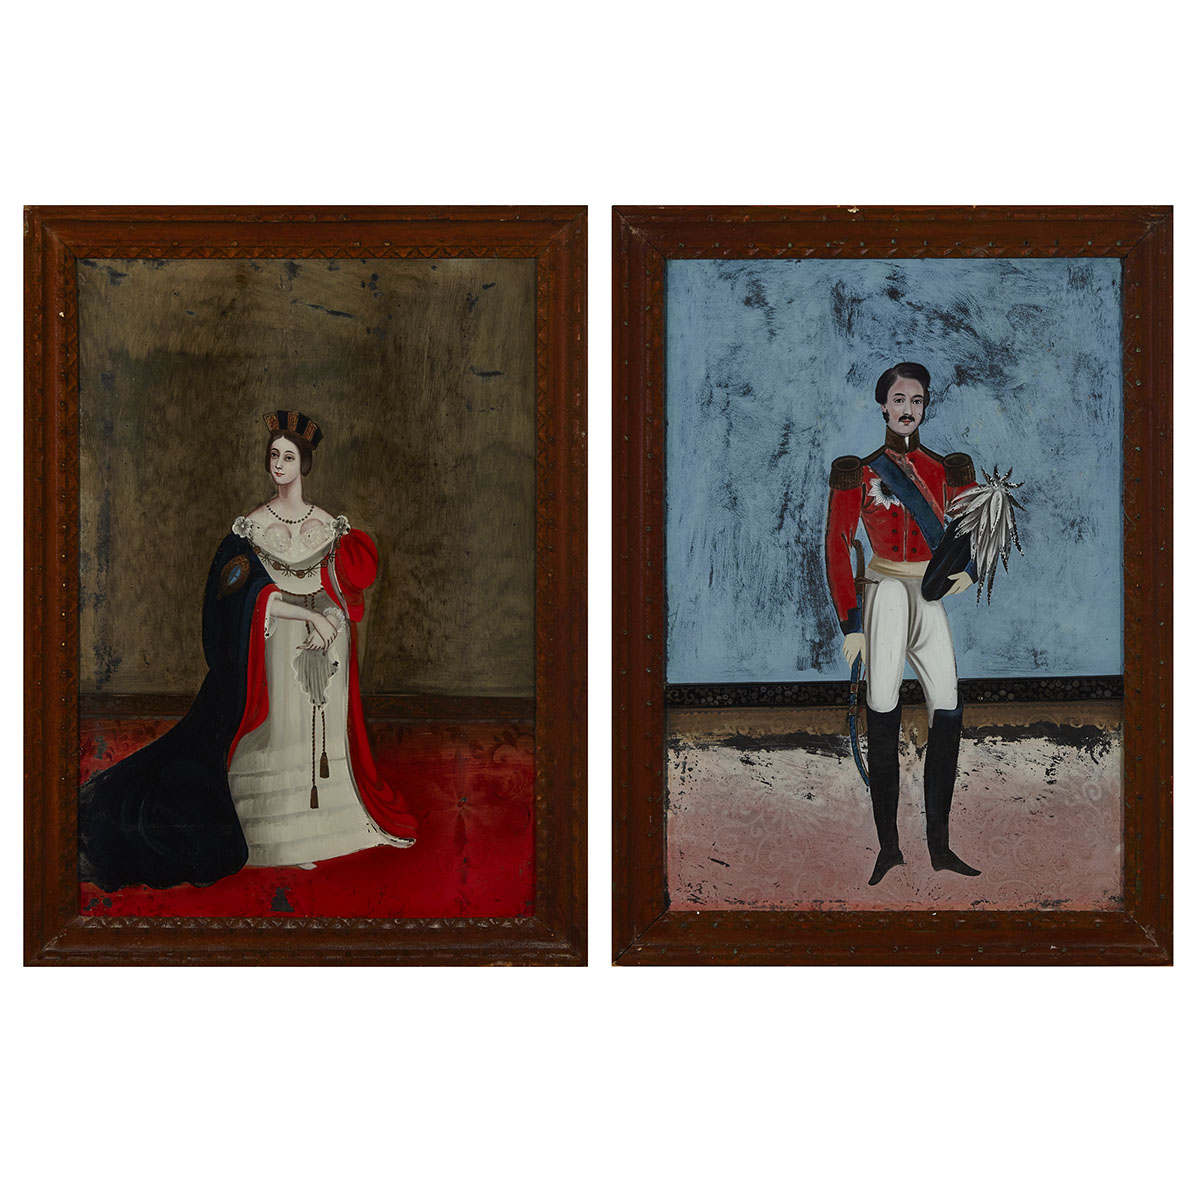 Pair of Chinese Export Reverse Paintings on Glass of Queen Victoria and Prince Albert, 19th century